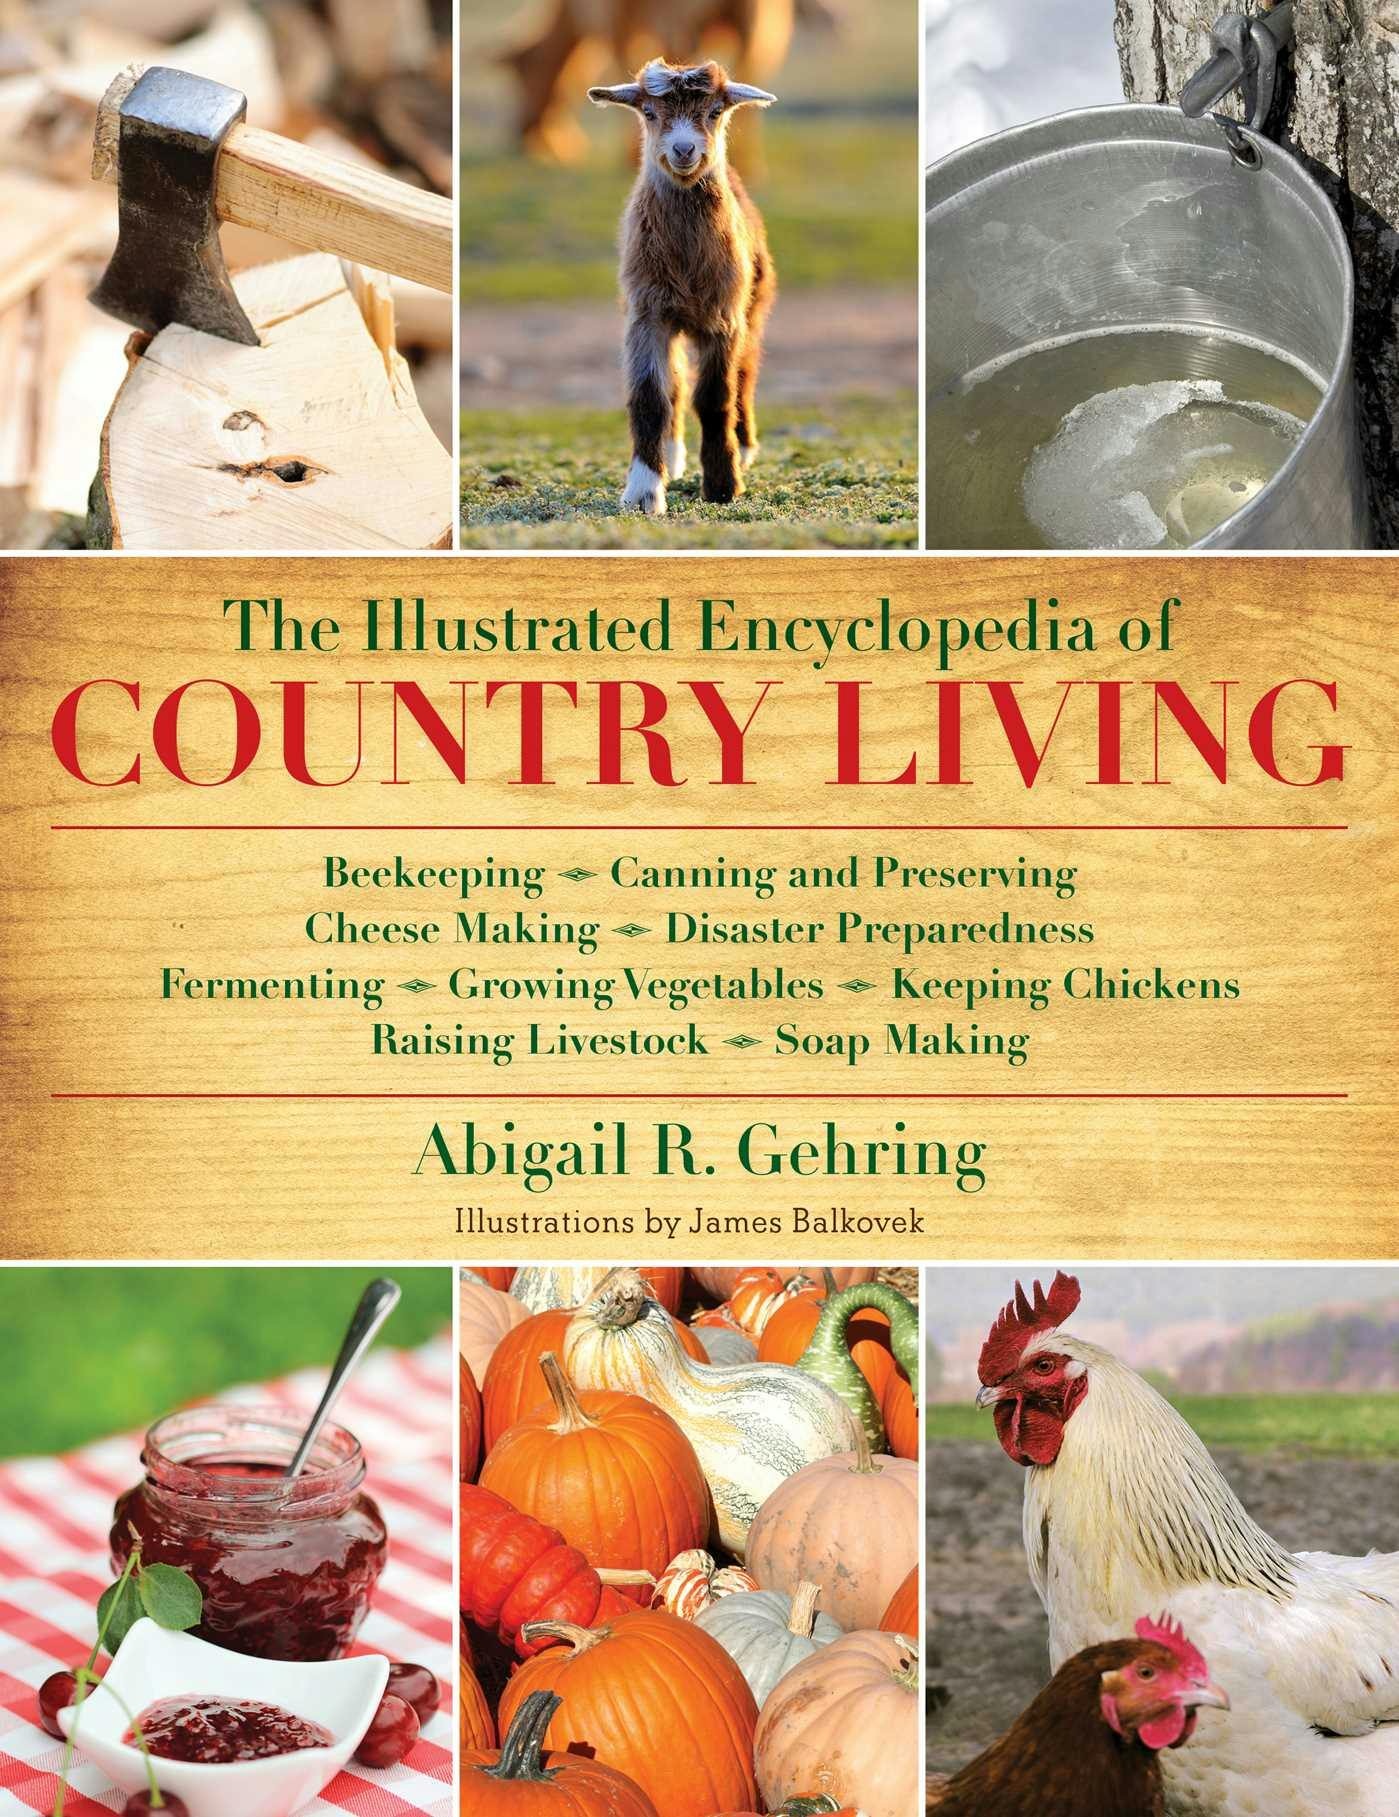 The Illustrated Encyclopedia of Country Living: Beekeeping, Canning and Preserving, Cheese Making, Disaster Preparedness, Fermenting, Growing Vegetables, Keeping Chickens, Raising Livestock, Soap Making, and more! - Abigail Gehring